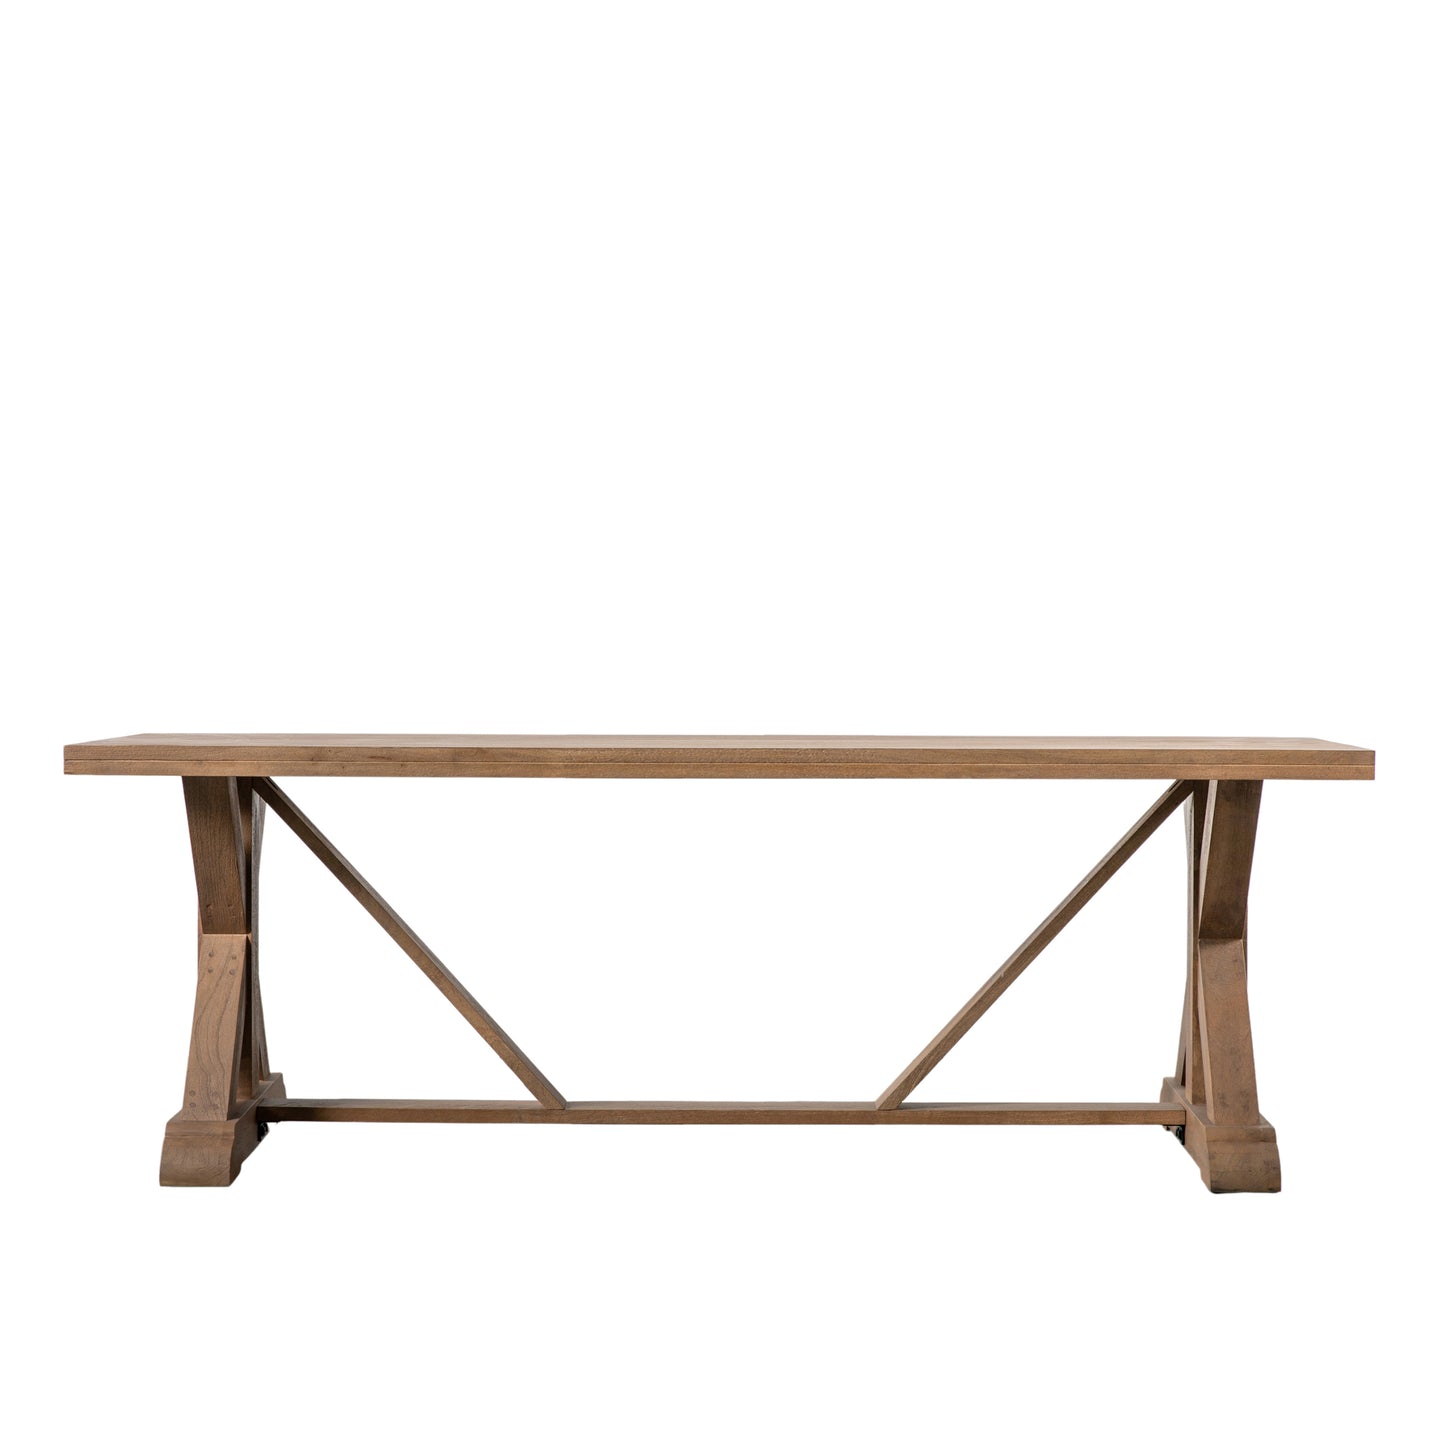 An Ashbourne Dining Table Large 2200x1000x760mm for interior decor and home furniture by Kikiathome.co.uk.